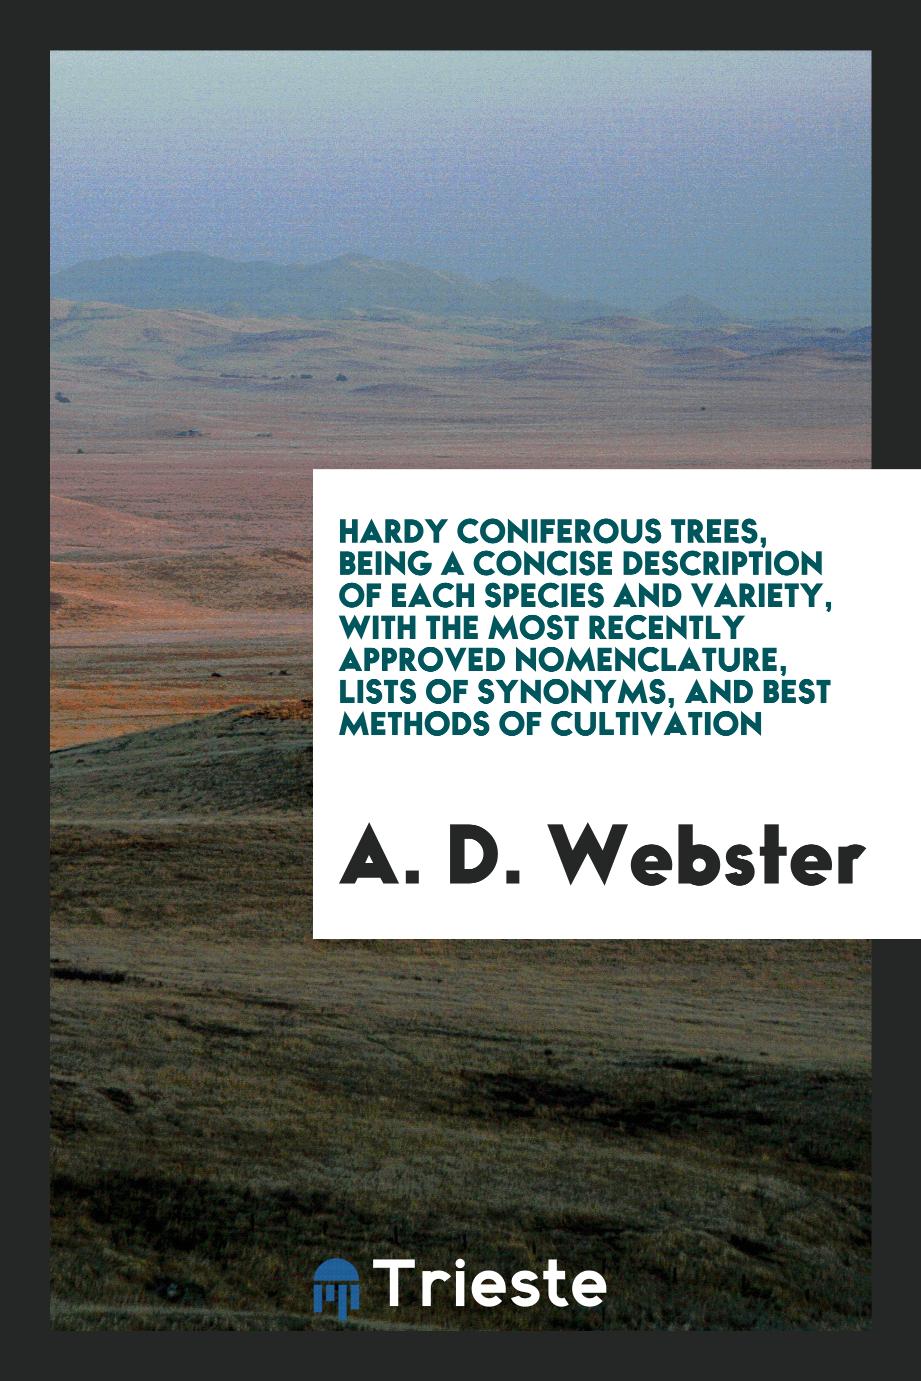 Hardy coniferous trees, being a concise description of each species and variety, with the most recently approved nomenclature, lists of synonyms, and best methods of cultivation